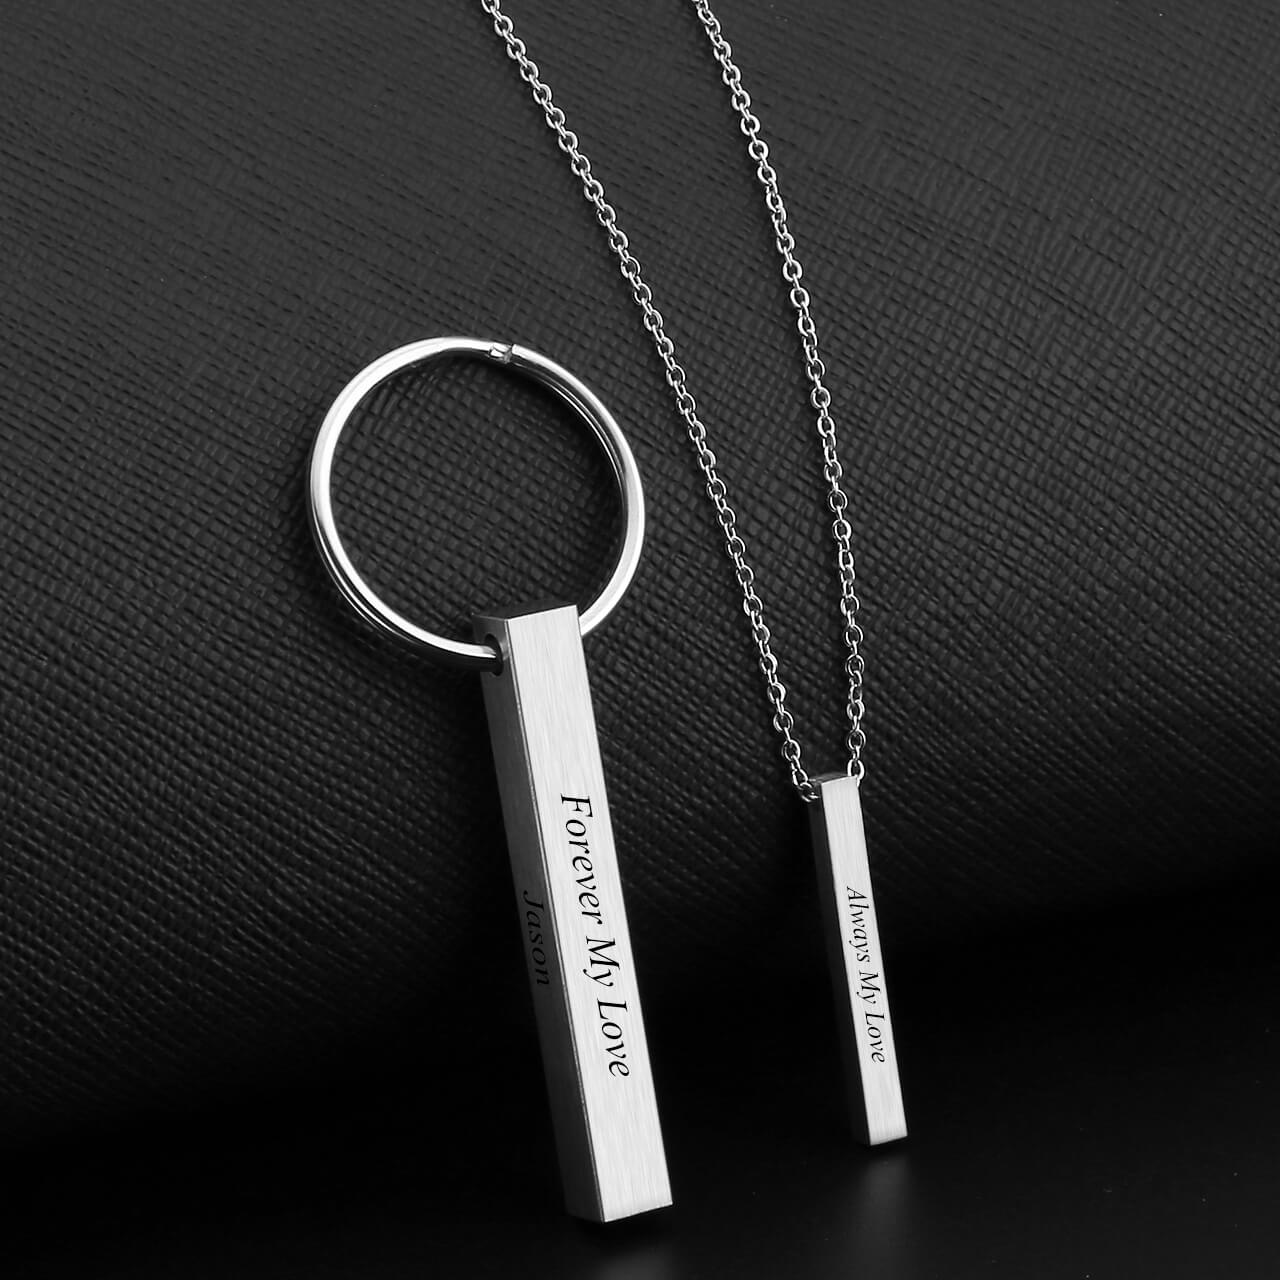 jovivi personalized name bar necklace keychain set for couples